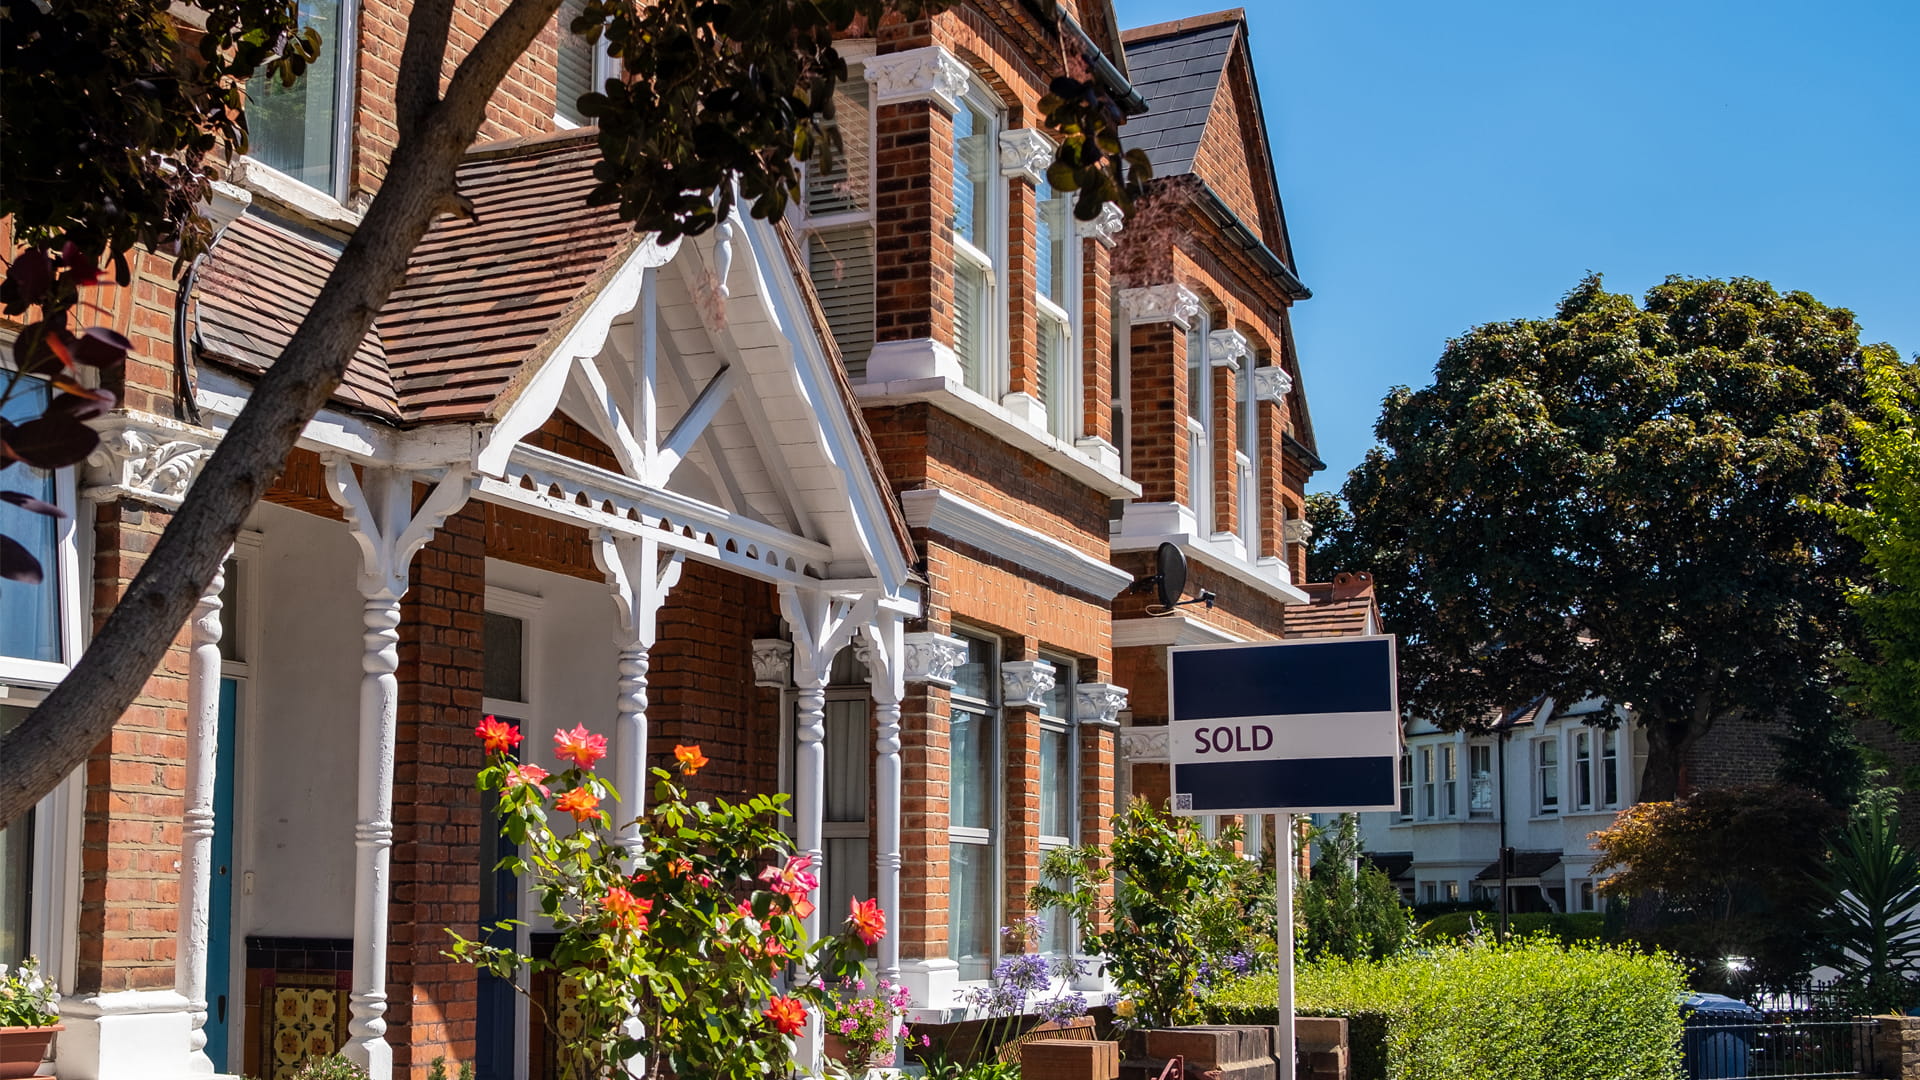 An estate agent's sold sign is displayed outside a victorian terraced house